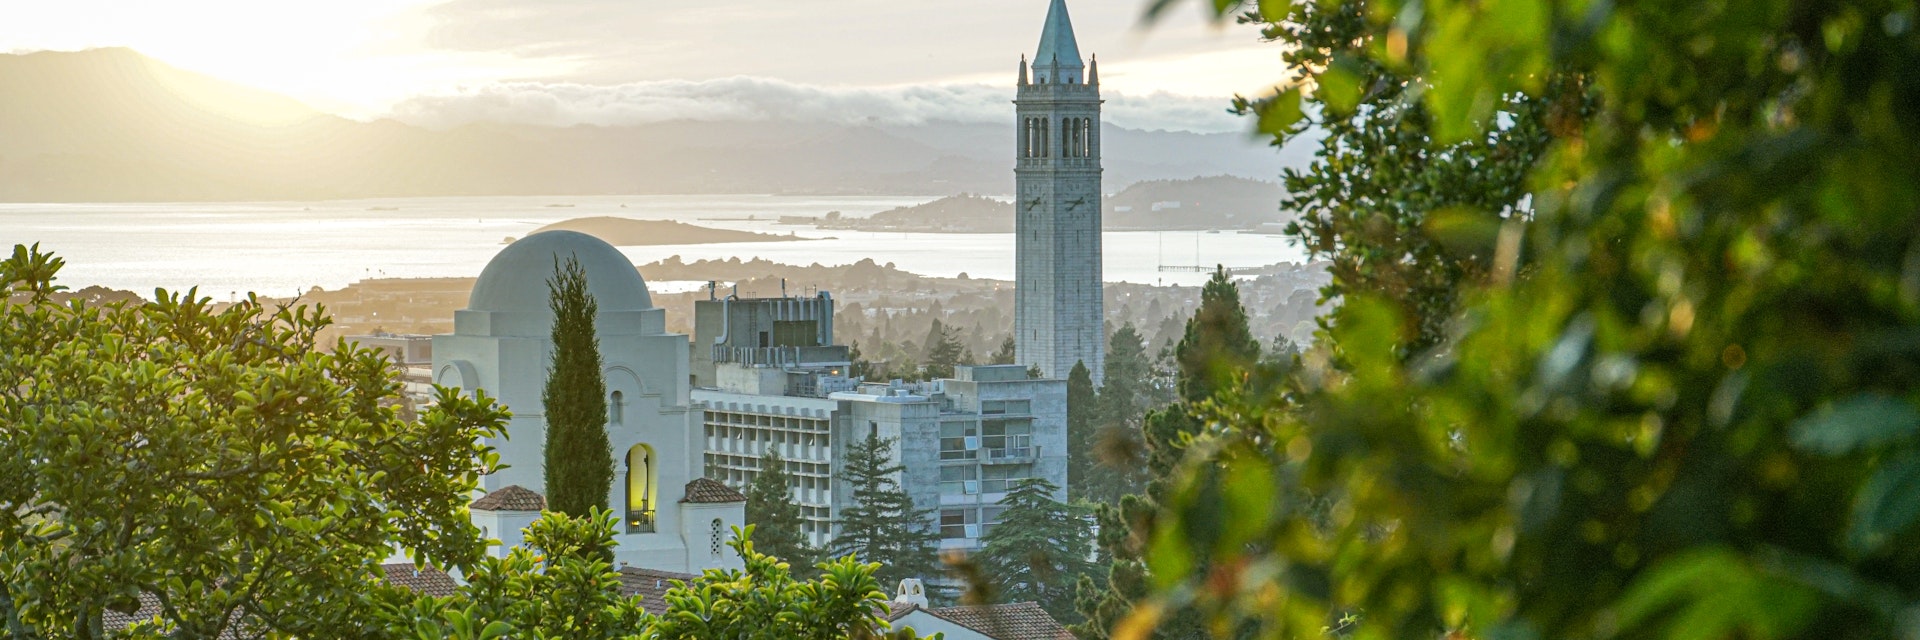 Beautiful view of Berkeley Skyline, including Sather Tower, or Campanile, and International House, with San Francisco Bay in the background.